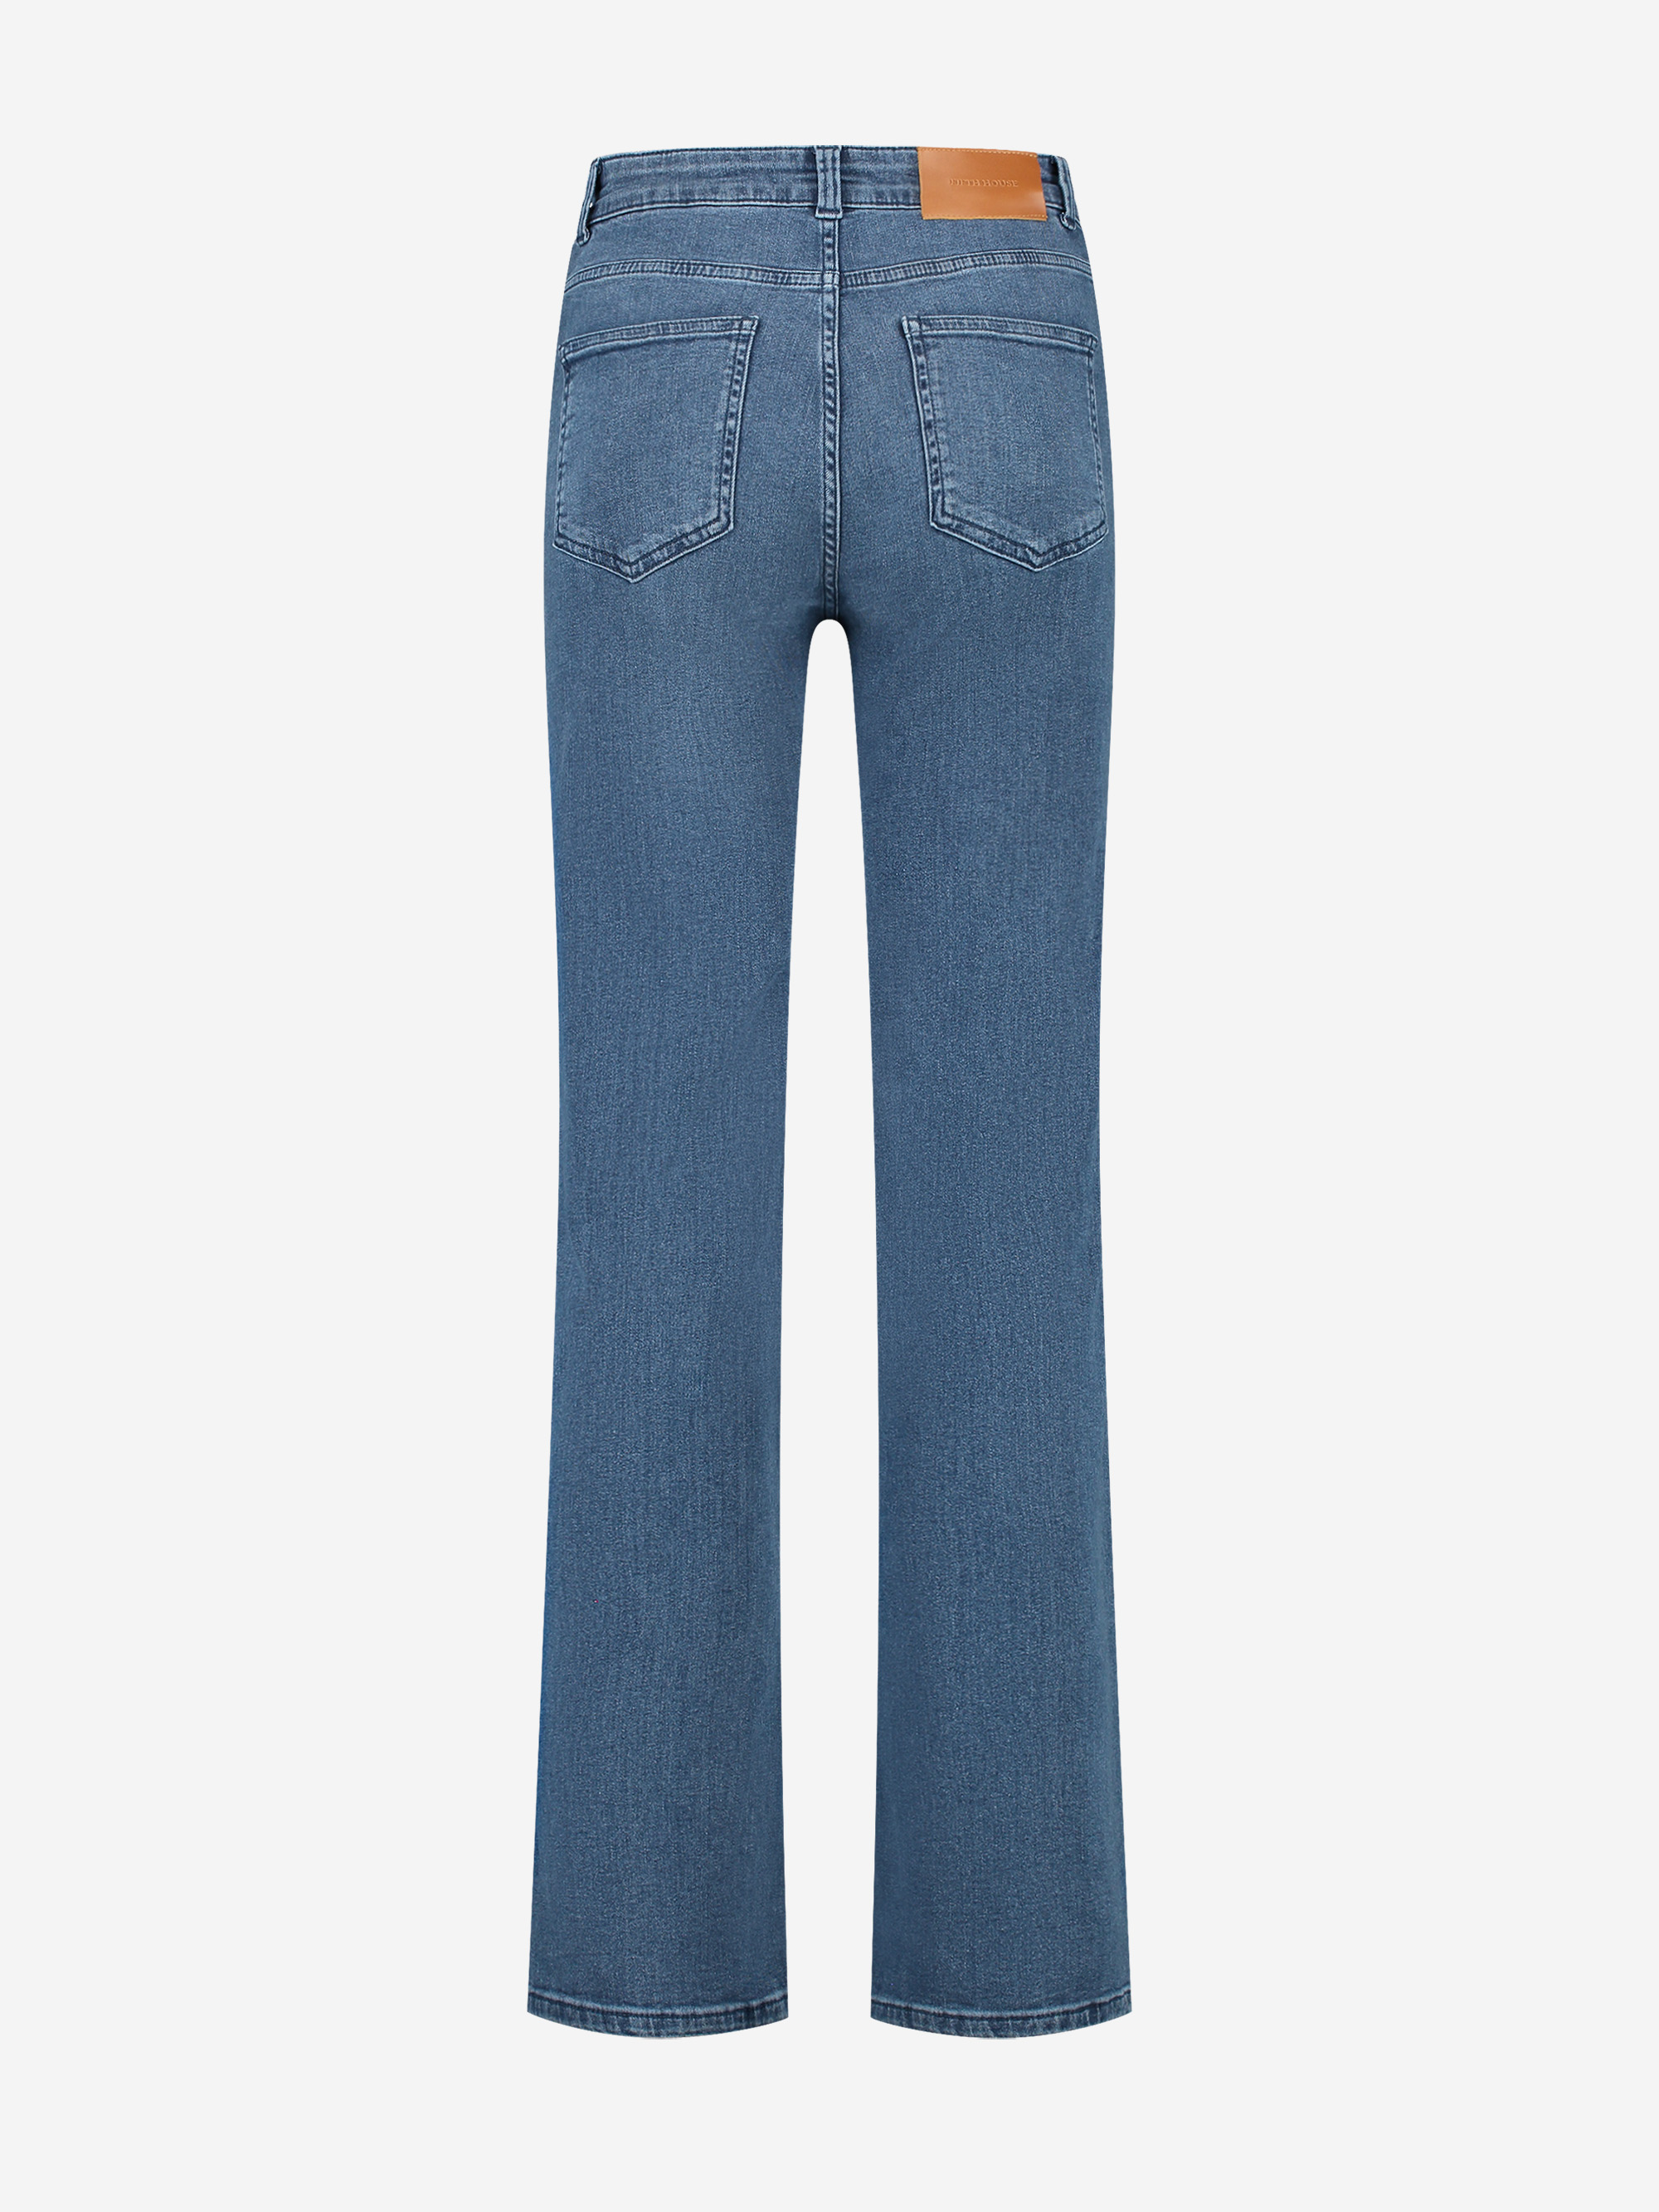 Brooklyn Button Jeans